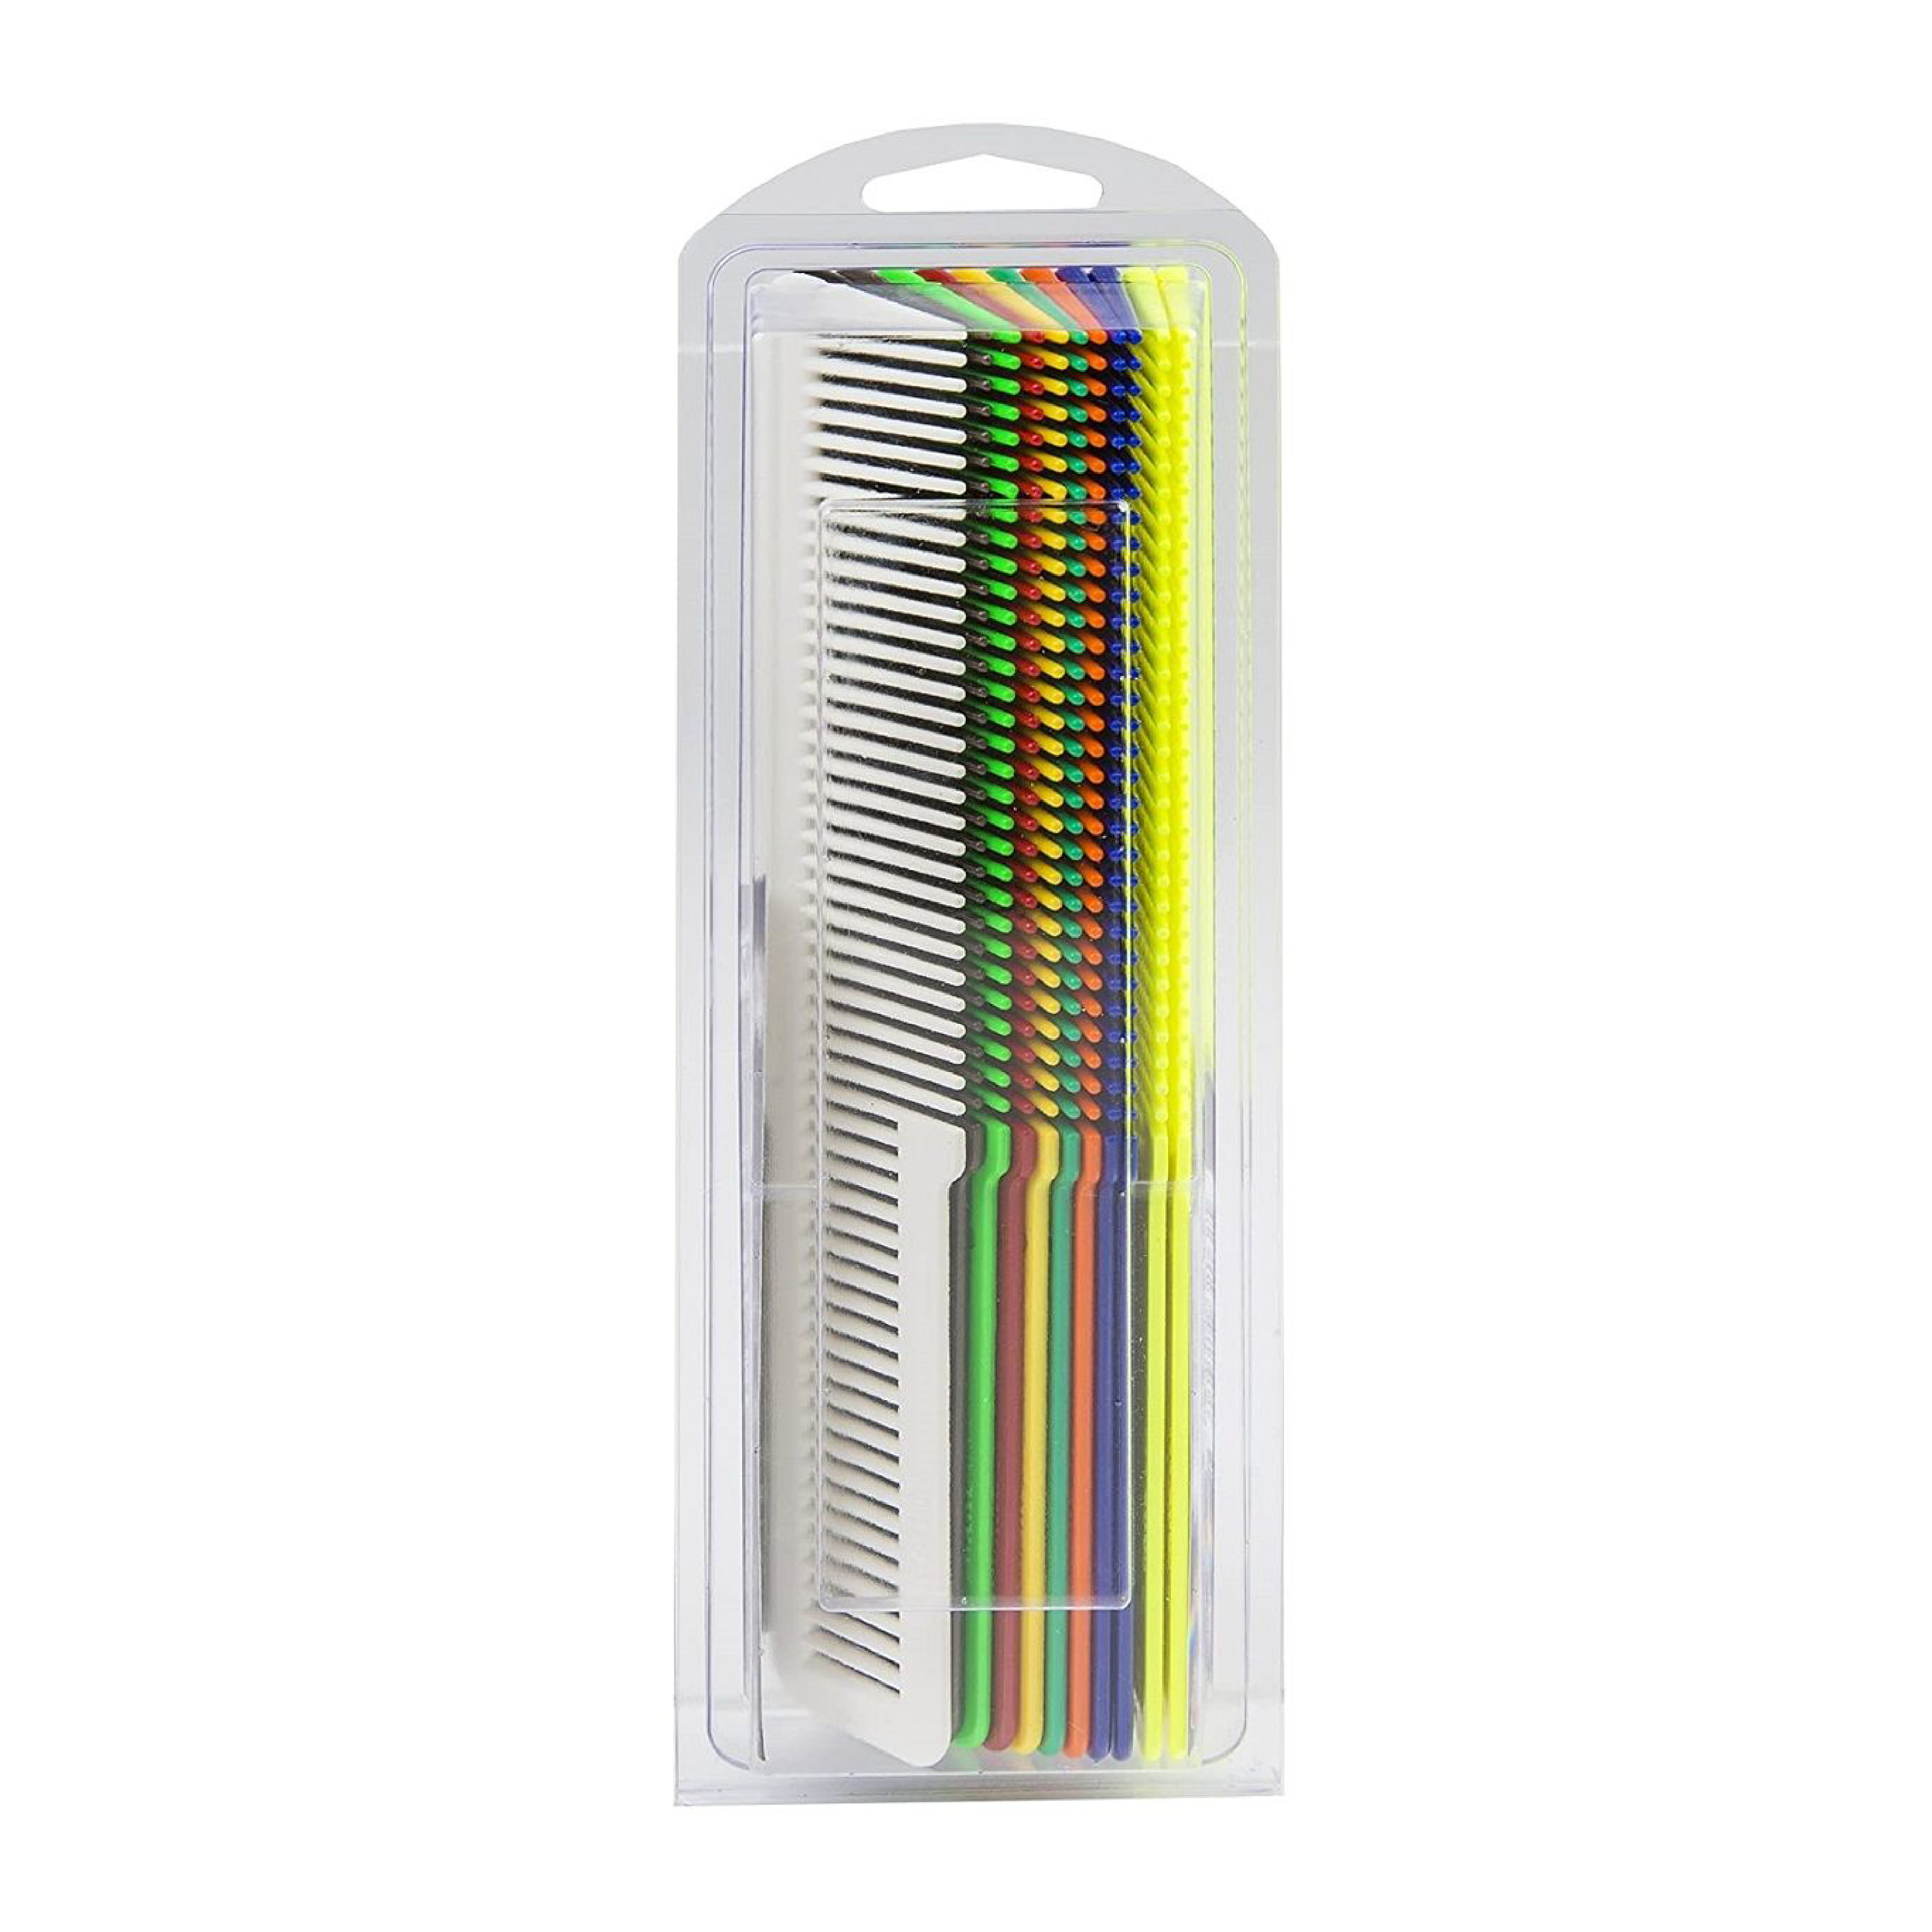 Wahl Professional Assorted Coloured Styling Combs - 12 Pack